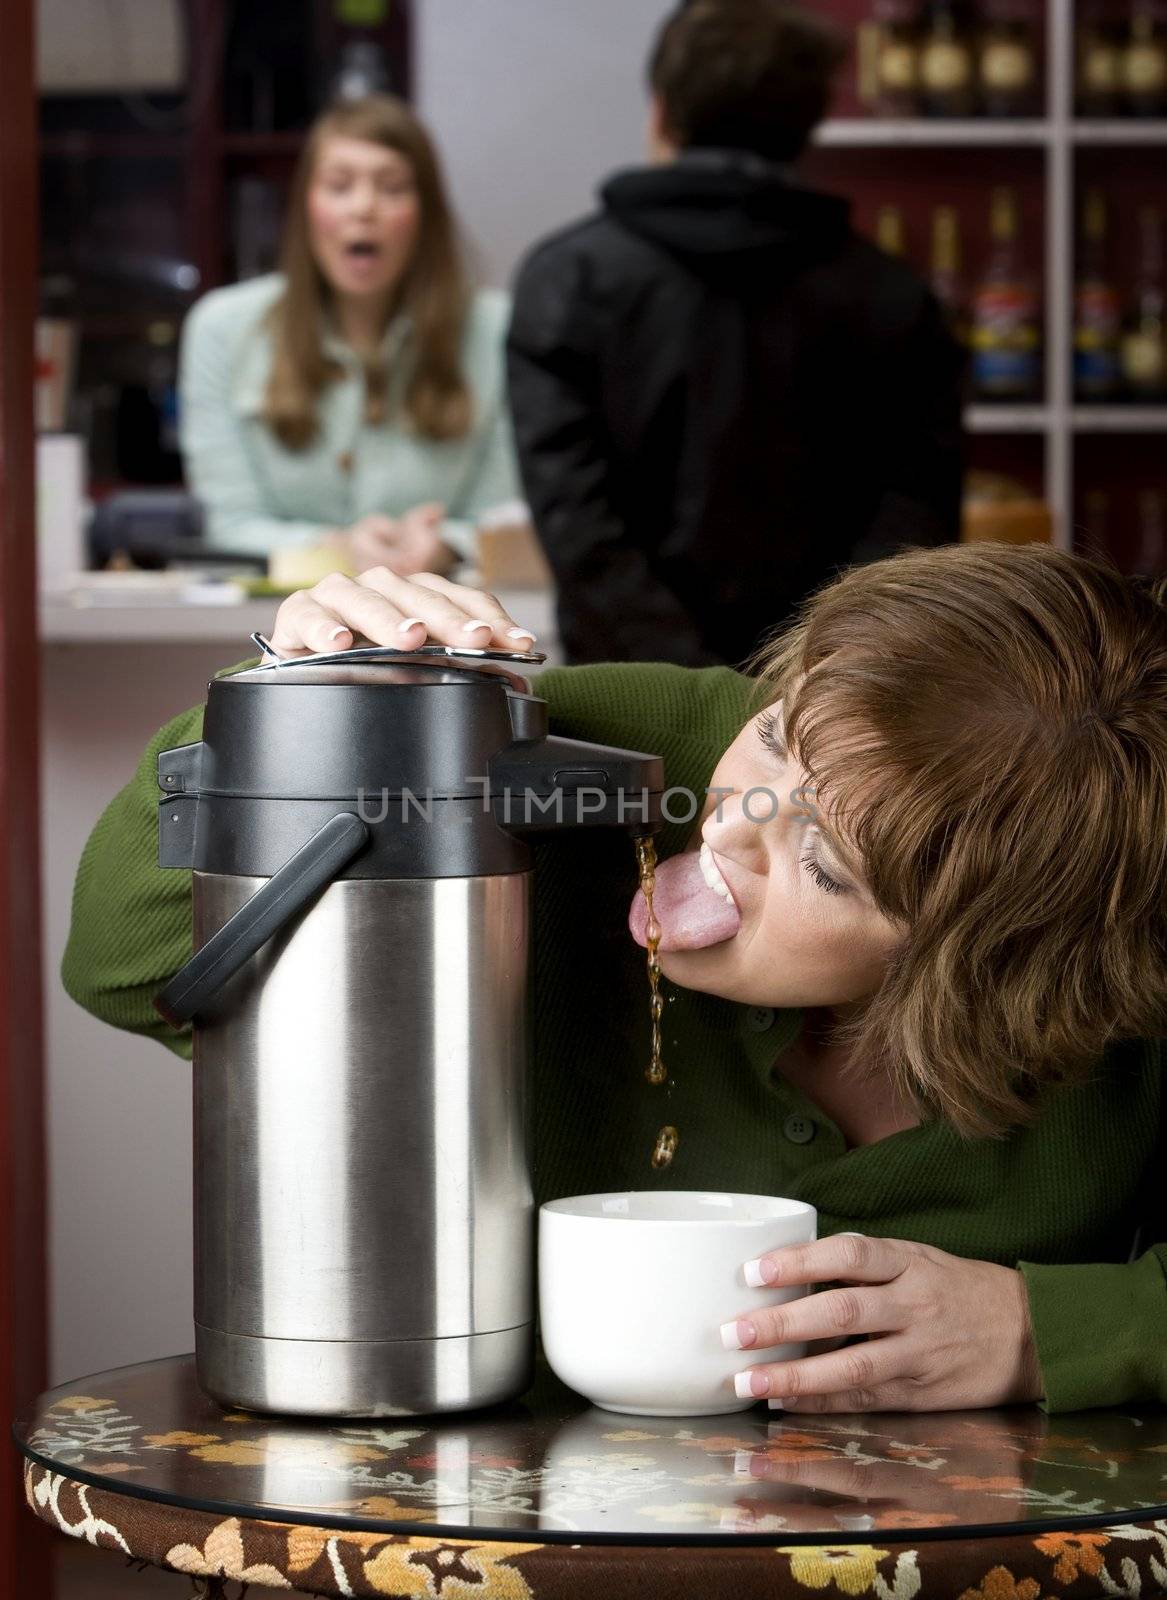 Woman drinking coffee directly from a dispenser by Creatista